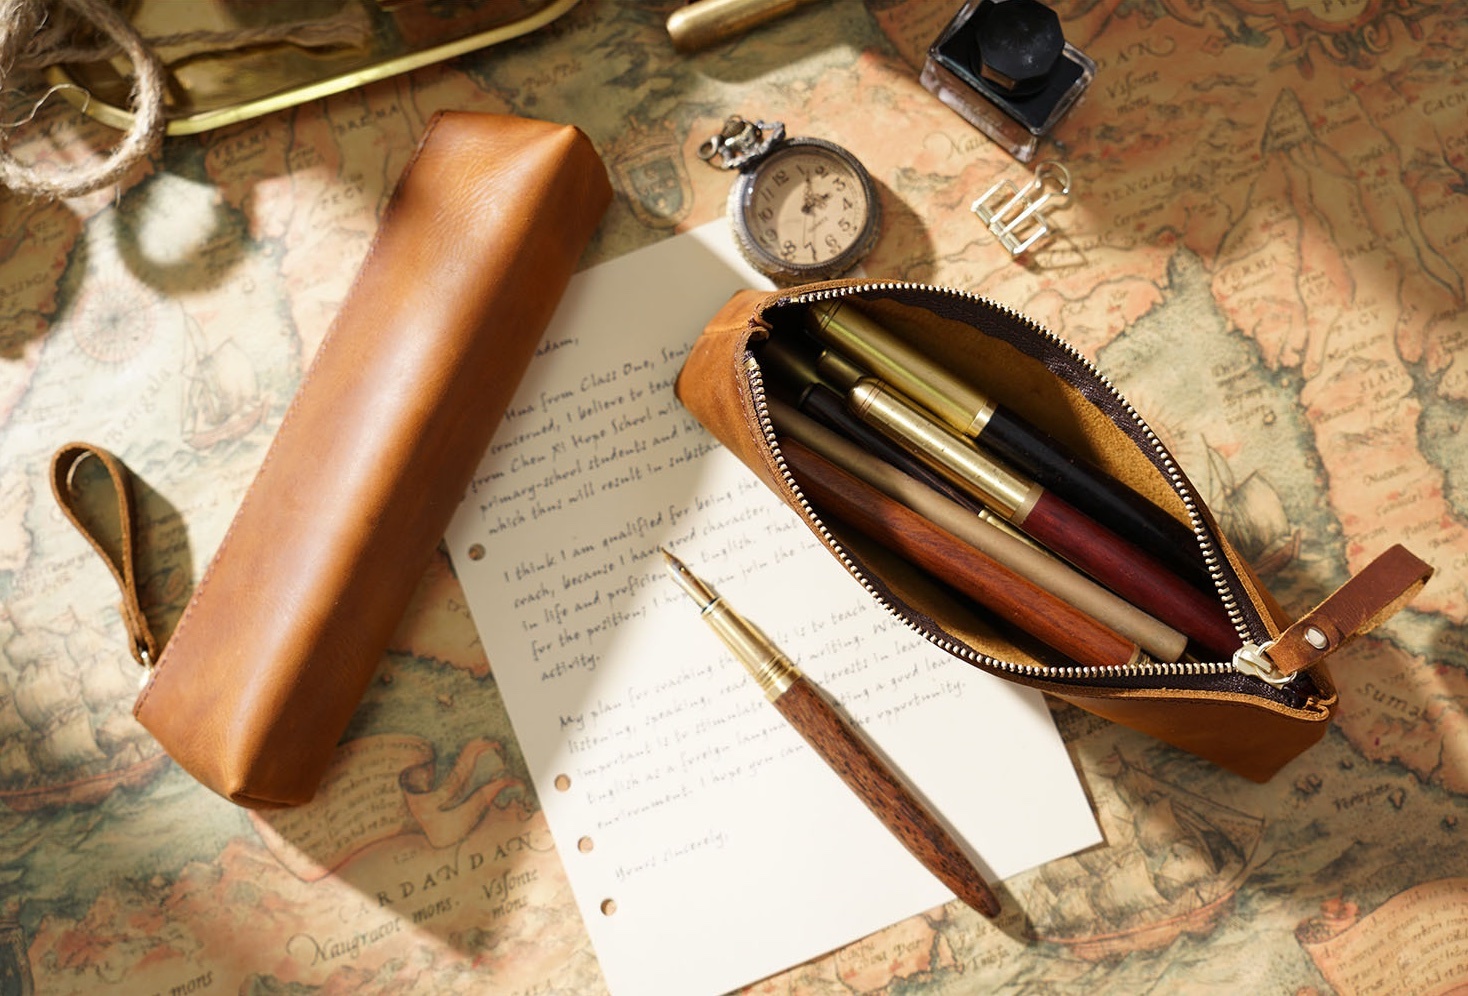 Tan Small Leather Pencil Case – Choosing Keeping